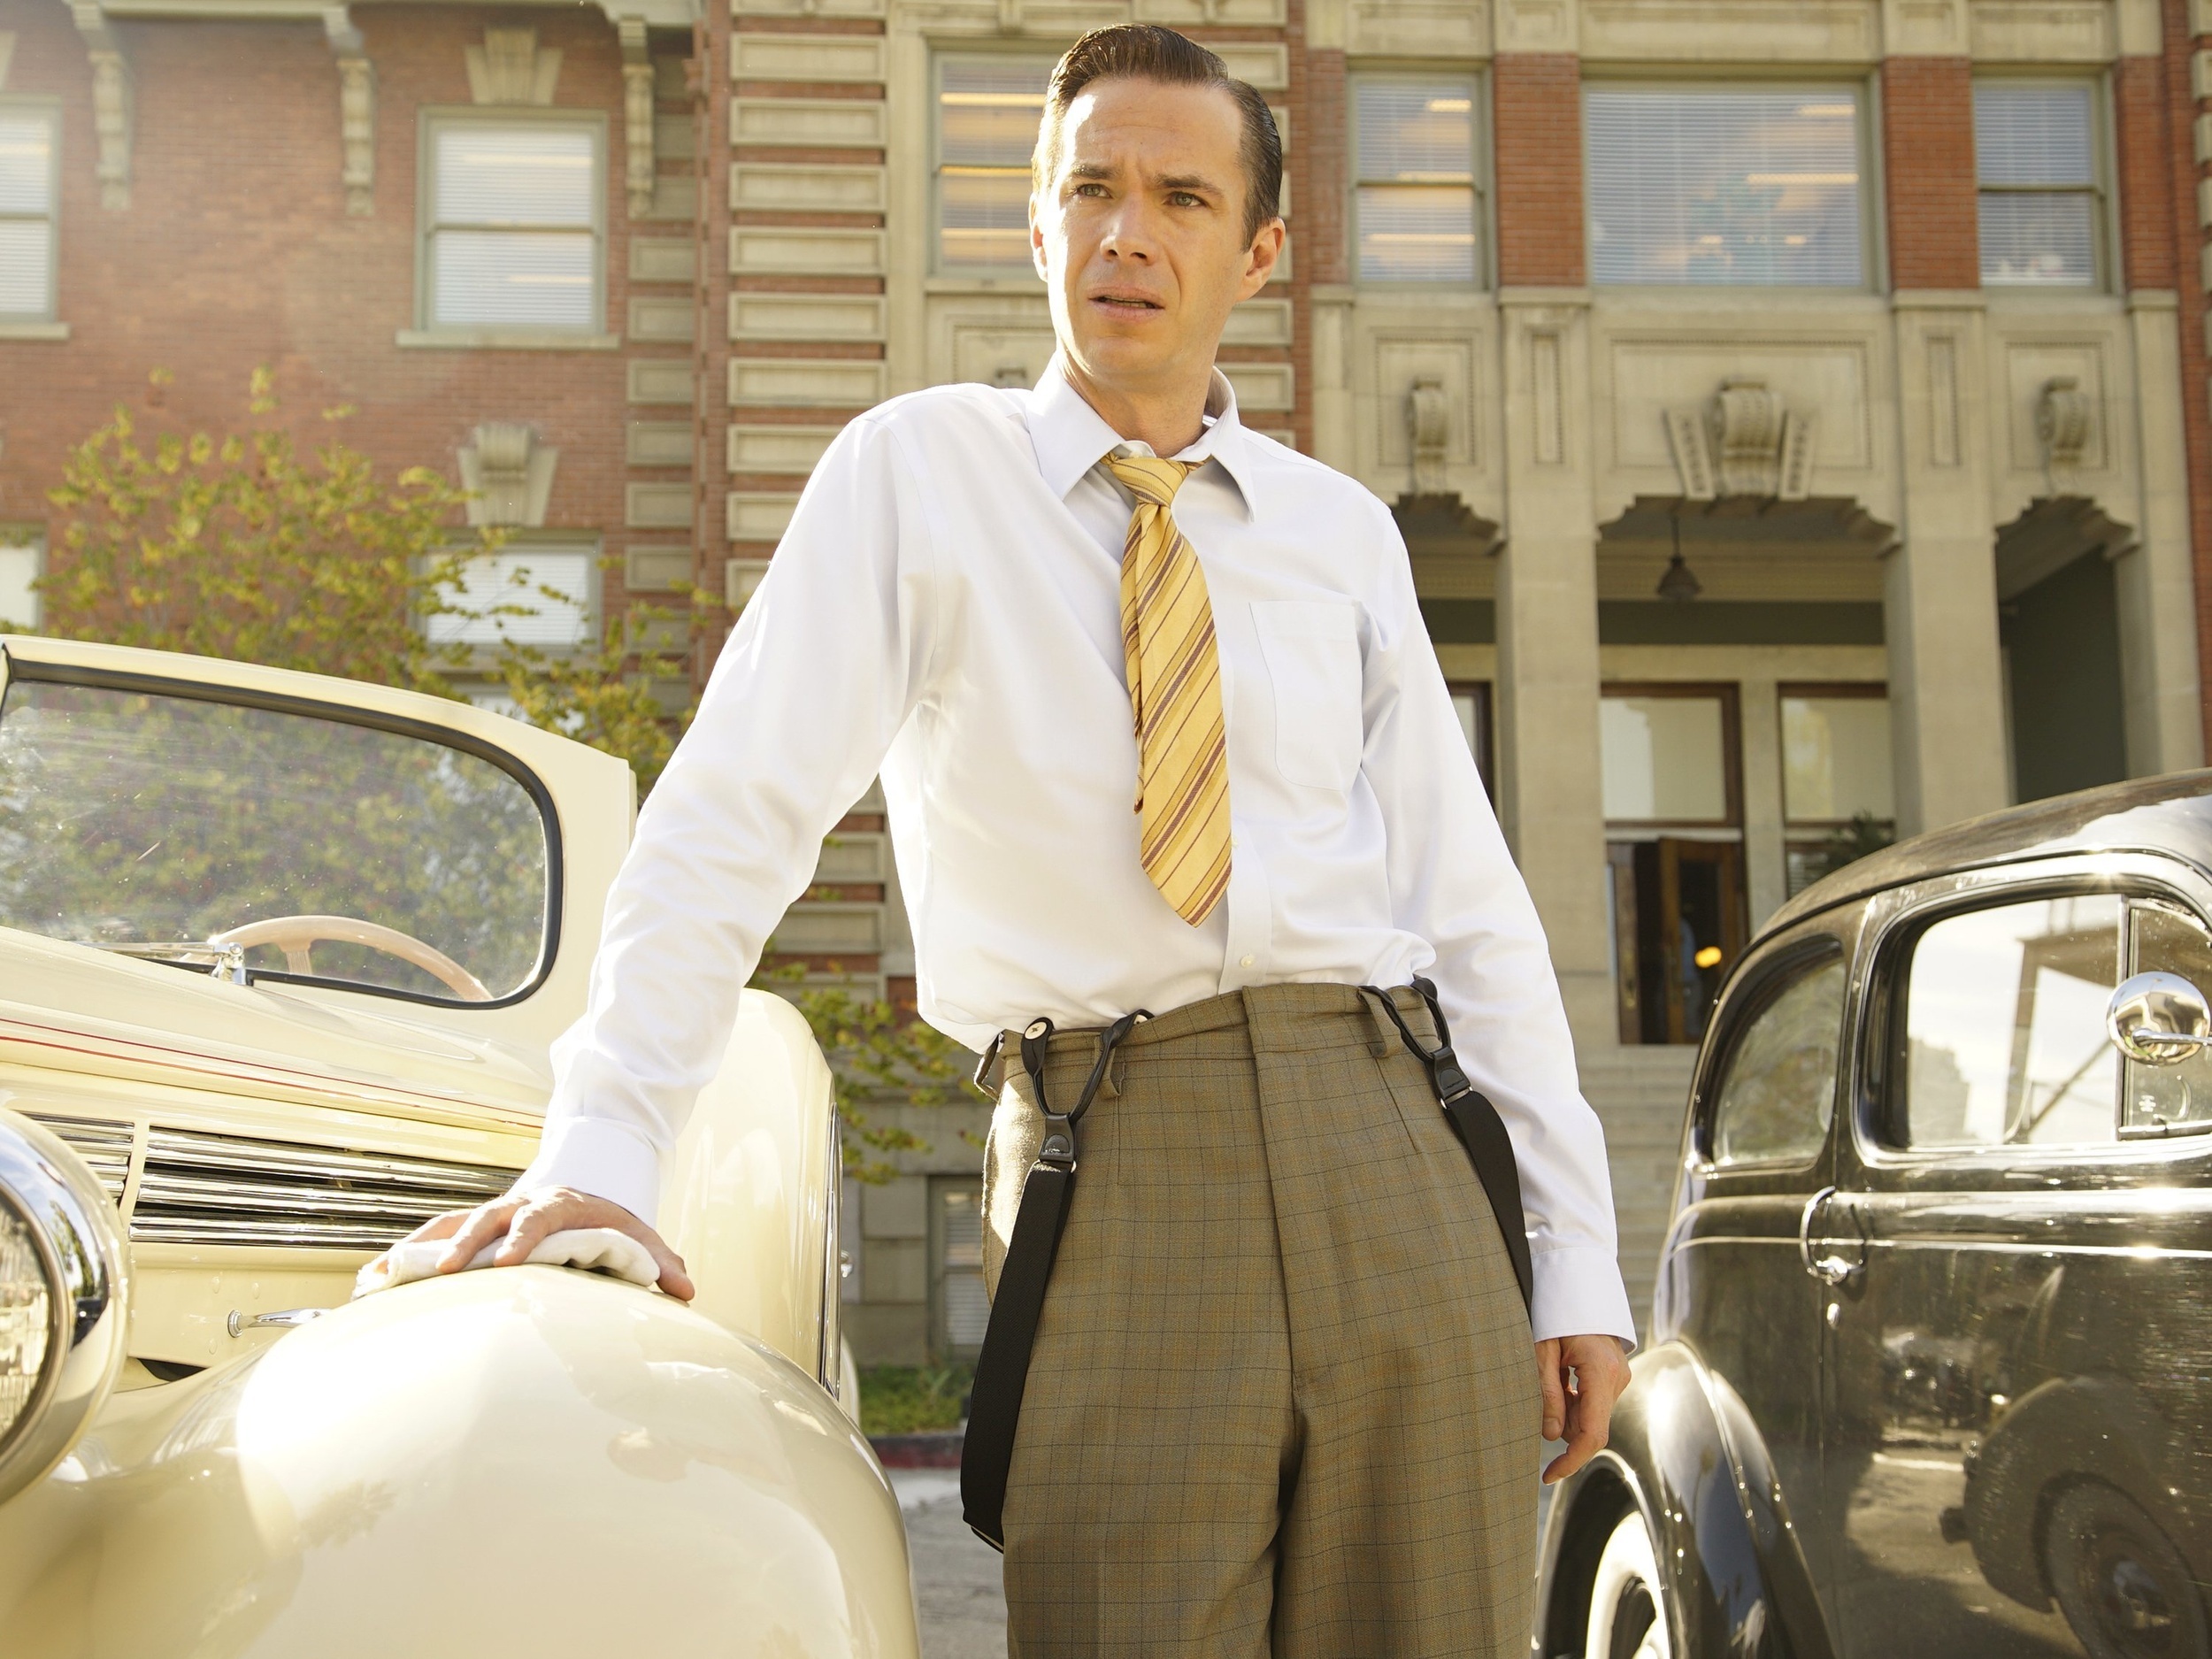 <p>In <em>Agent Carter</em>, James D’Arcy plays Jarvis, the majordomo of Howard Stark and confidante of Peggy Carter. The character was created for and introduced in the show. However, D’Arcy appears as Jarvis during one of the many flashbacks in<em> Endgame</em>. This marked the first time a Marvel character originating with a TV show appeared in an MCU movie.</p><p><a href='https://www.msn.com/en-us/community/channel/vid-cj9pqbr0vn9in2b6ddcd8sfgpfq6x6utp44fssrv6mc2gtybw0us'>Follow us on MSN to see more of our exclusive entertainment content.</a></p>